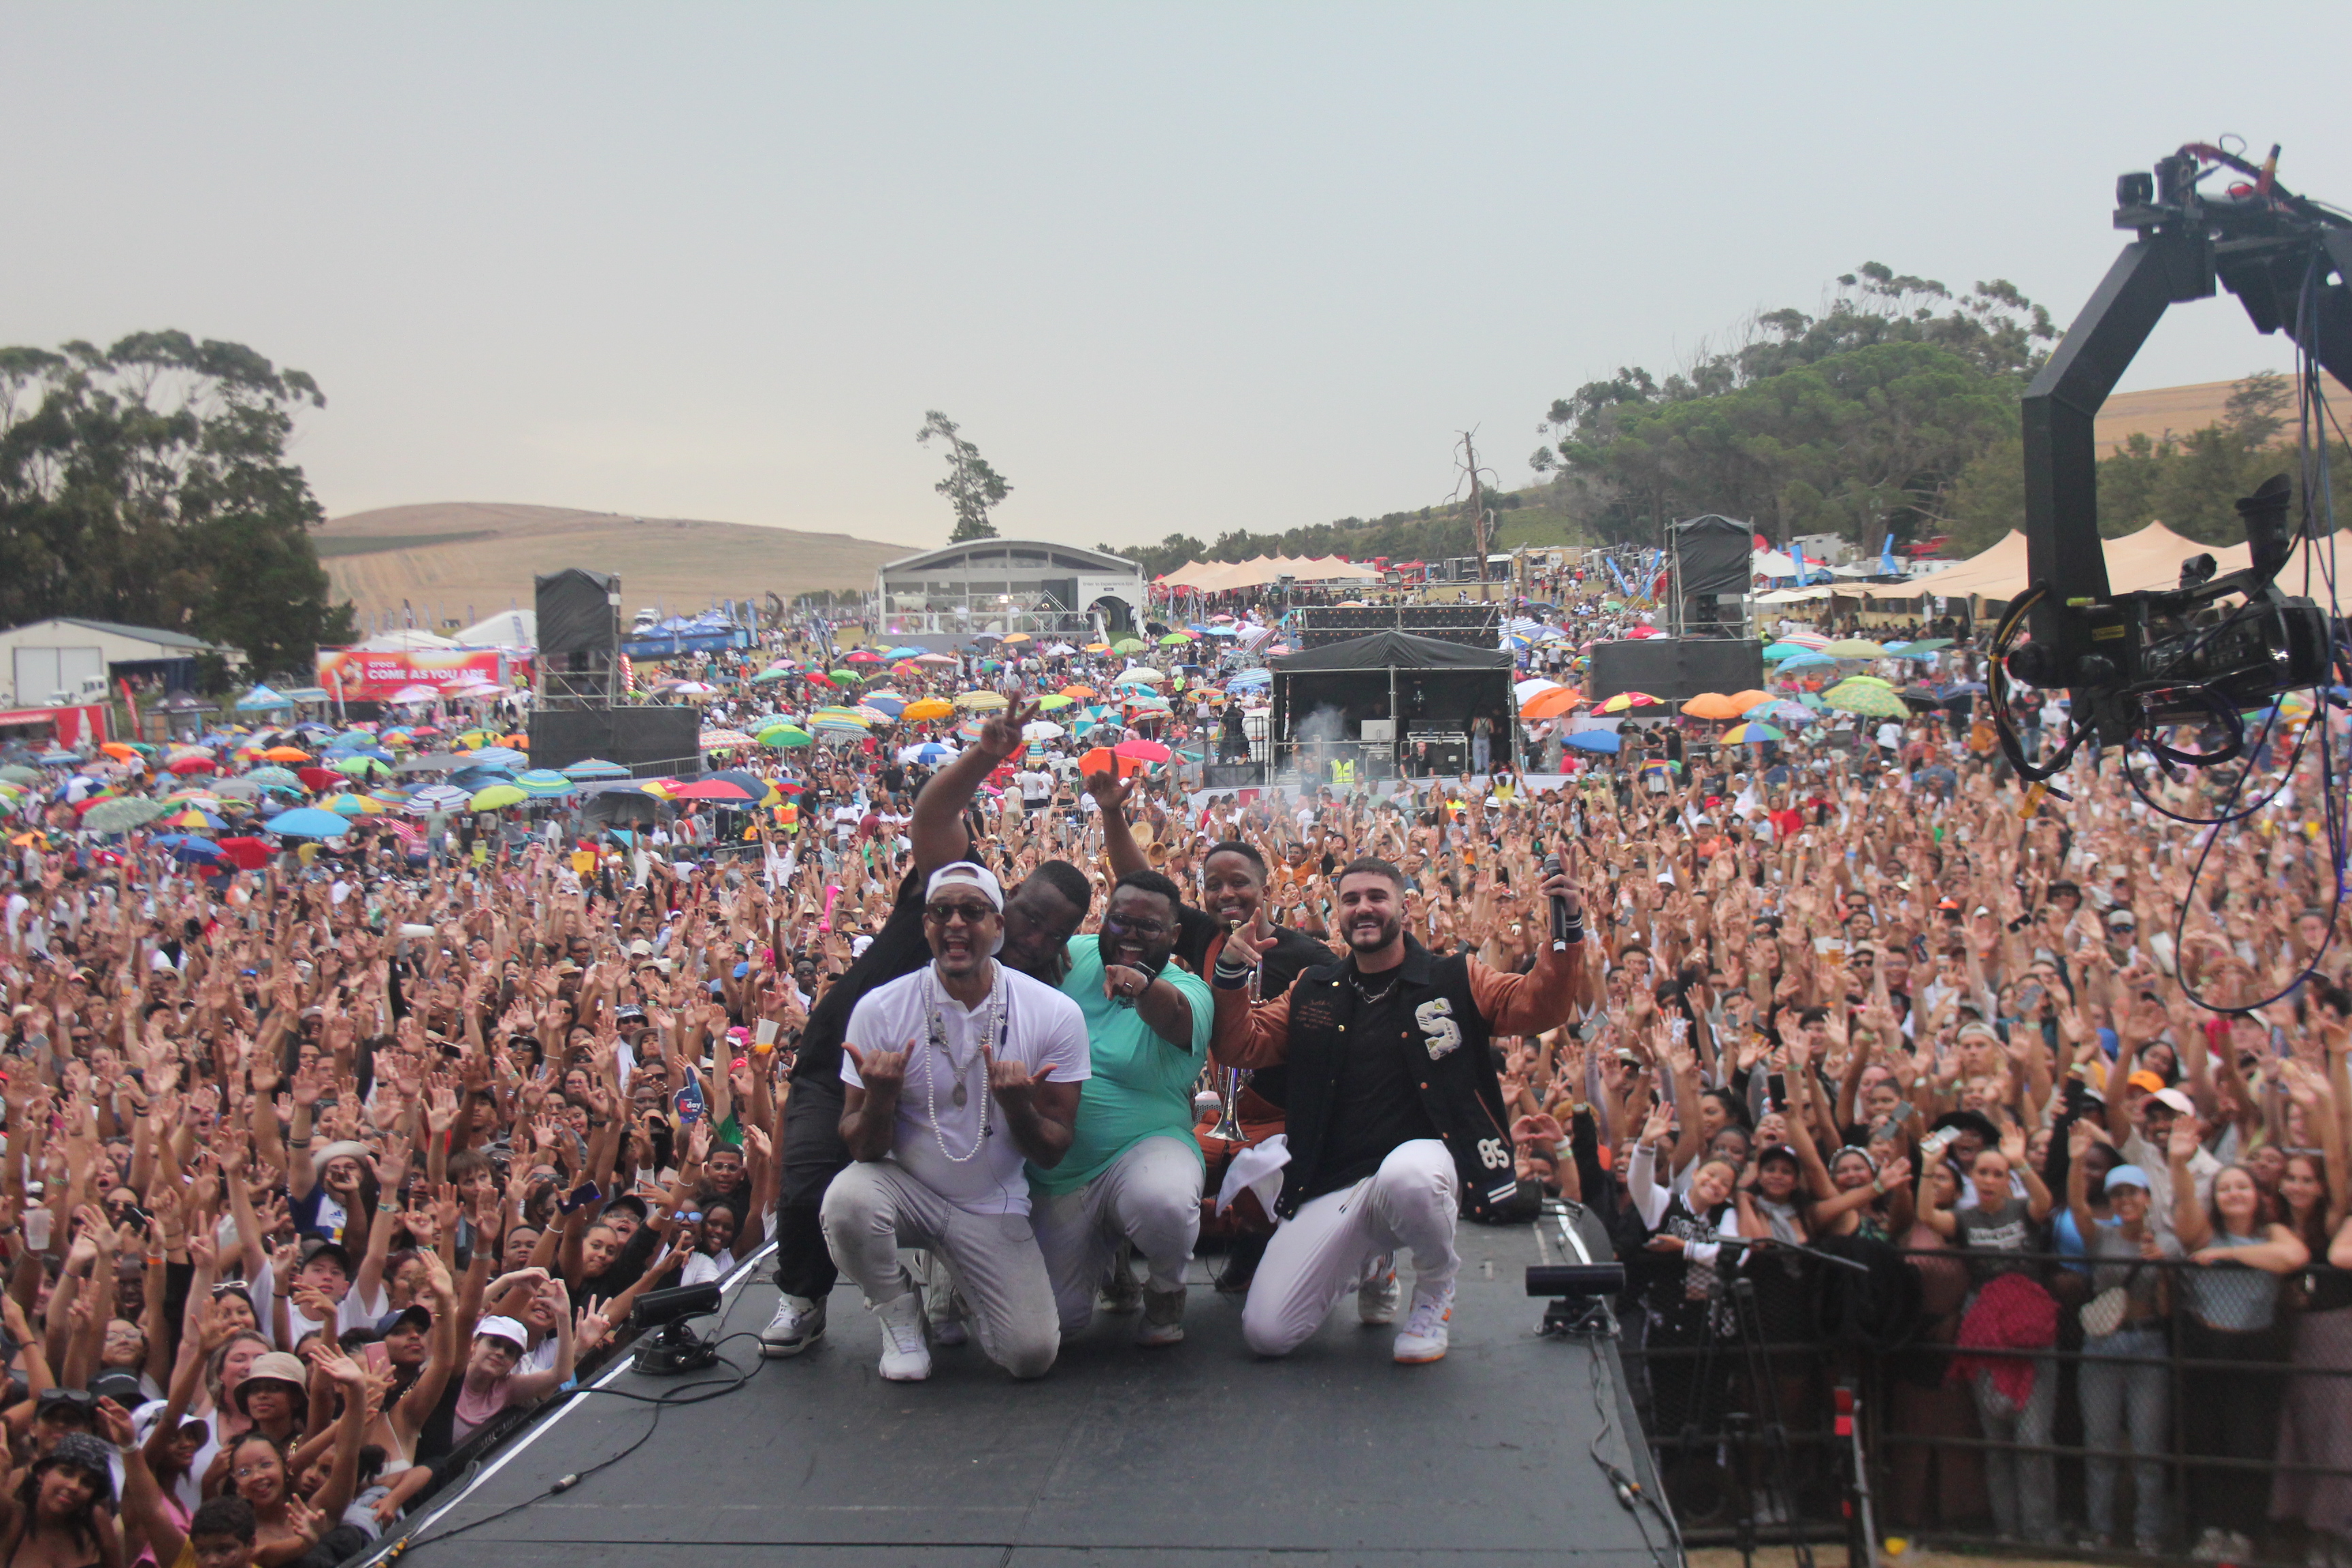 Mi Casa taking a photo with the crowd after their set at the Galaxy KDay Festival. Image: Oren-Andrew Wentzel